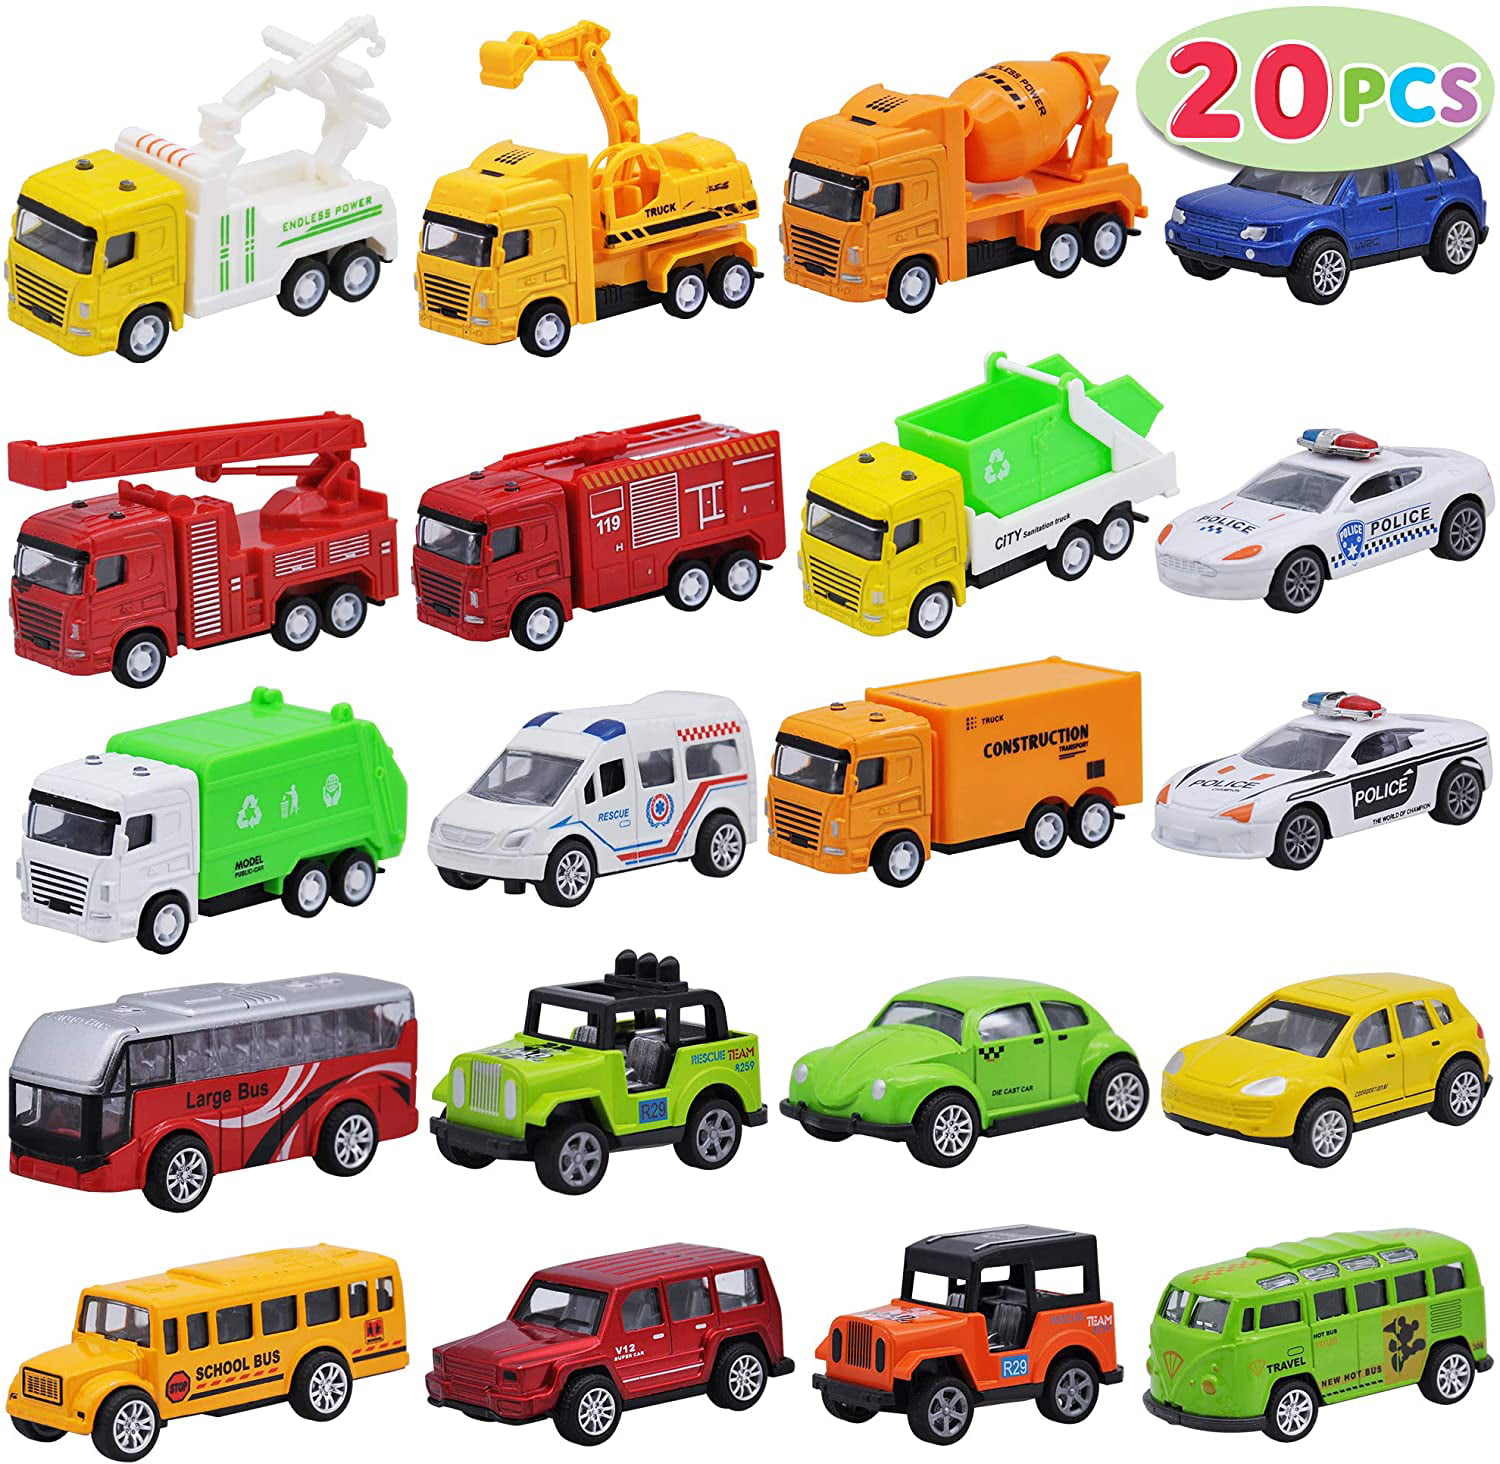 5 Pack Mini Assorted Construction Car Toy Pull Back and Go Car Toy Play Set Toy Cars for Kids Toddlers Boys Child Zooawa Pull Back Cars 